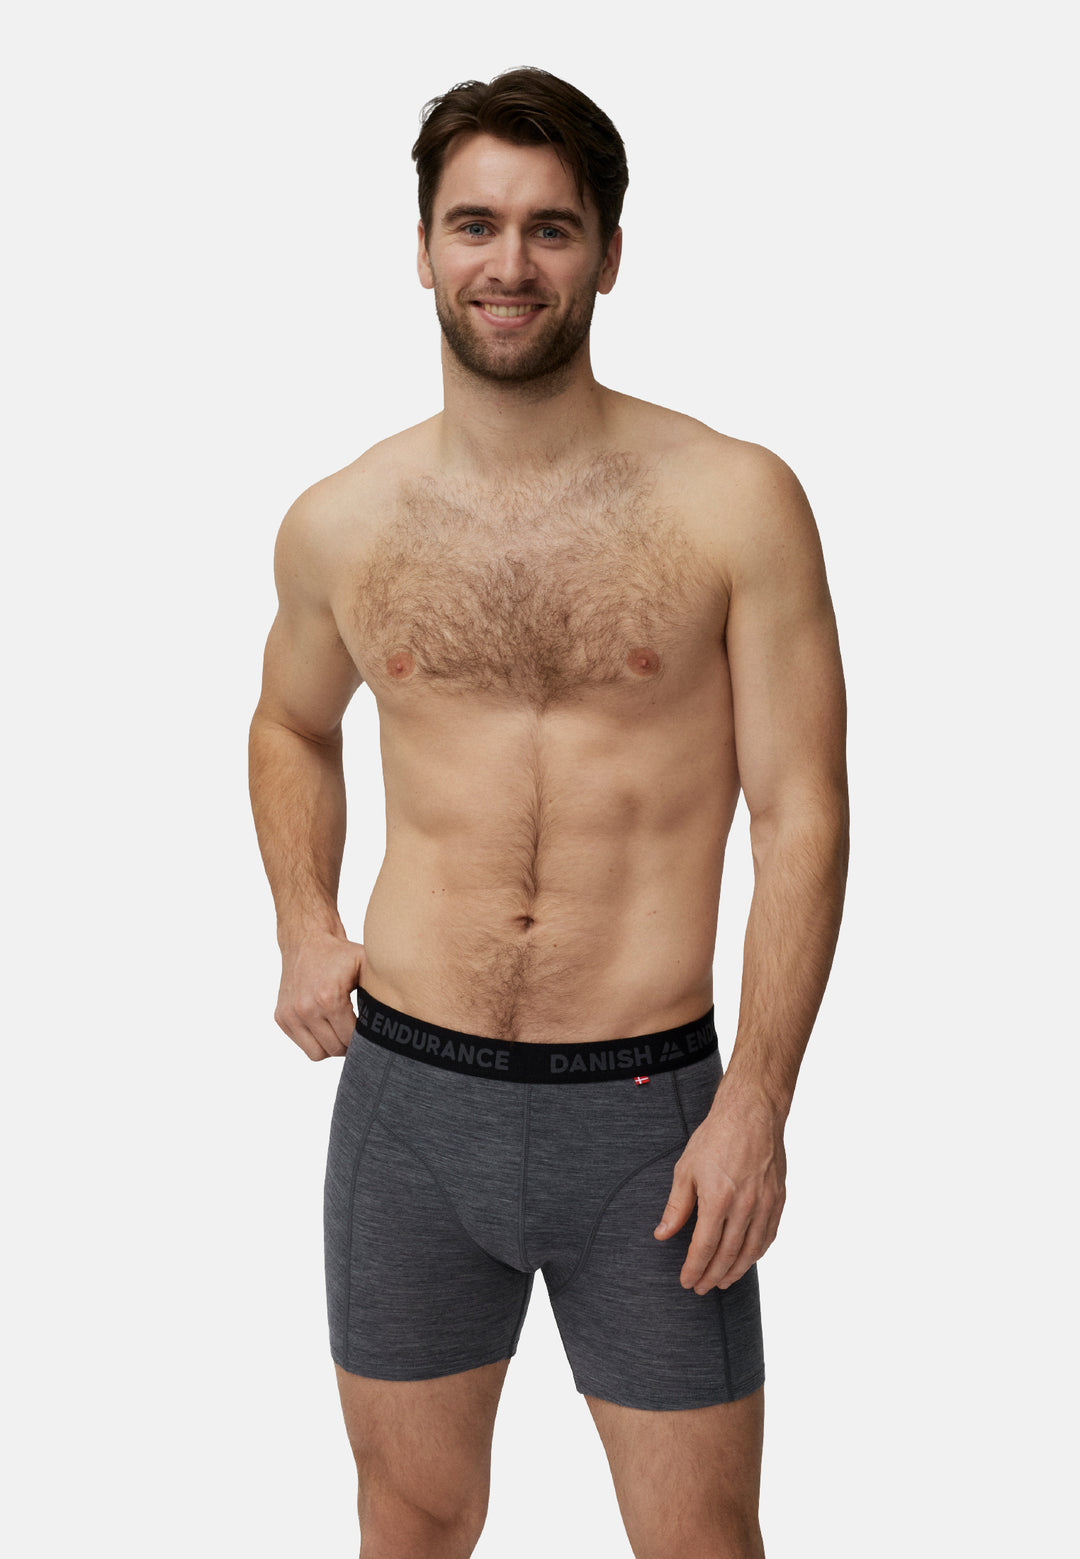 Two-pack of endurance logo briefs